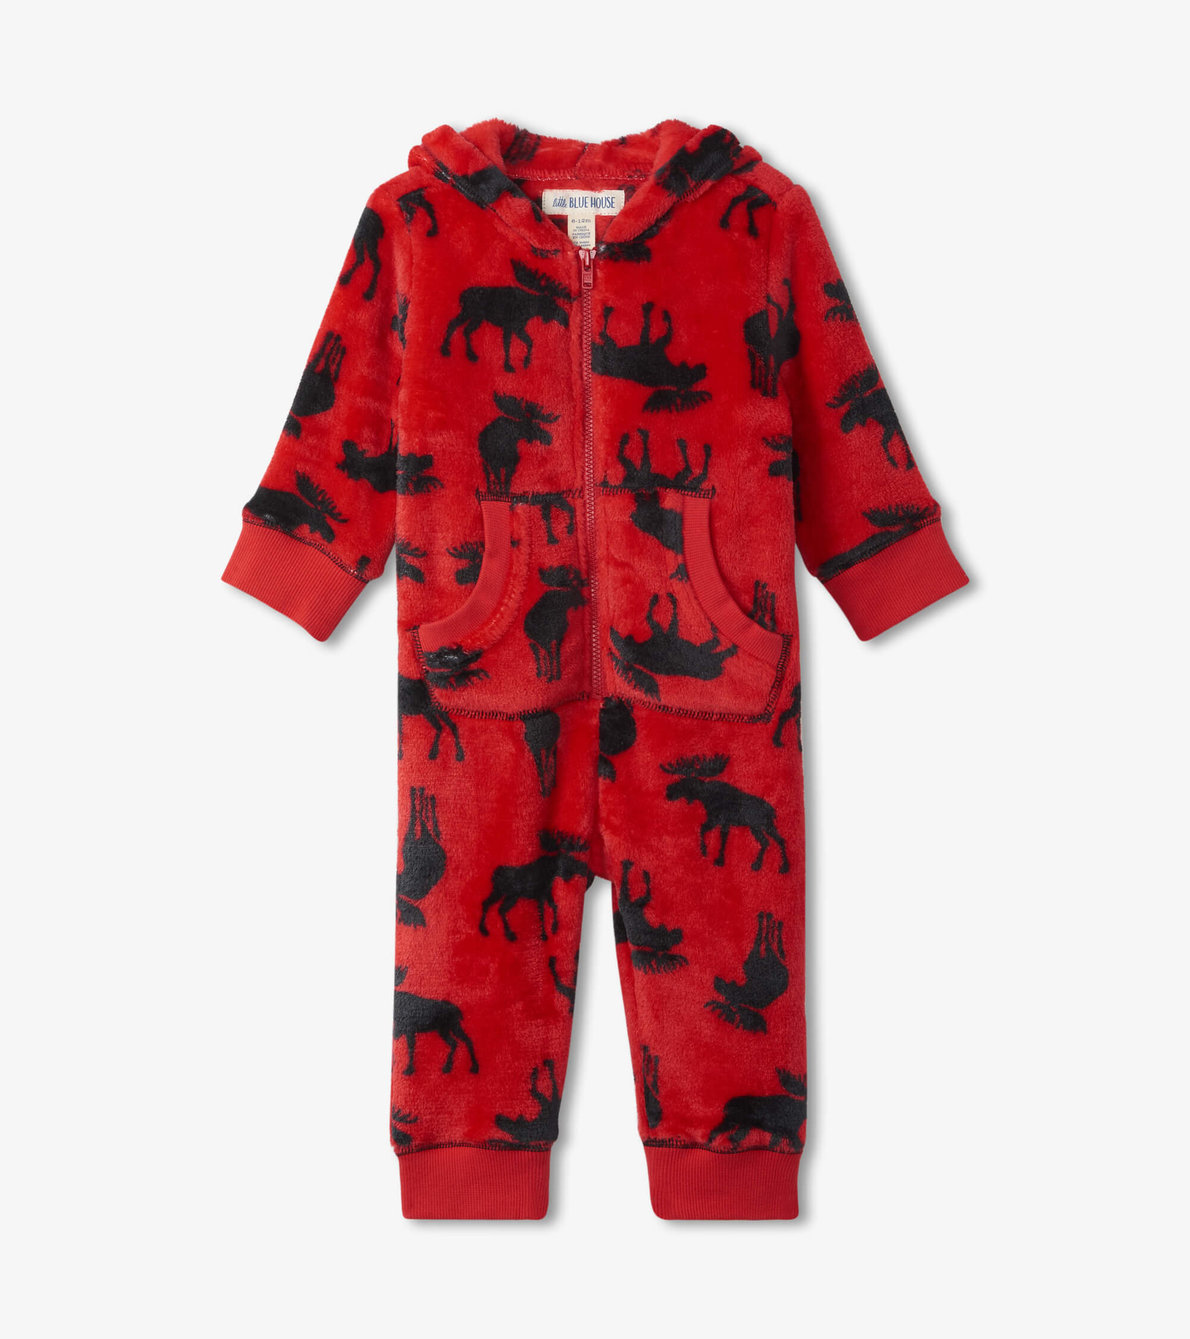 View larger image of Moose on Red Baby Hooded Fleece Jumpsuit